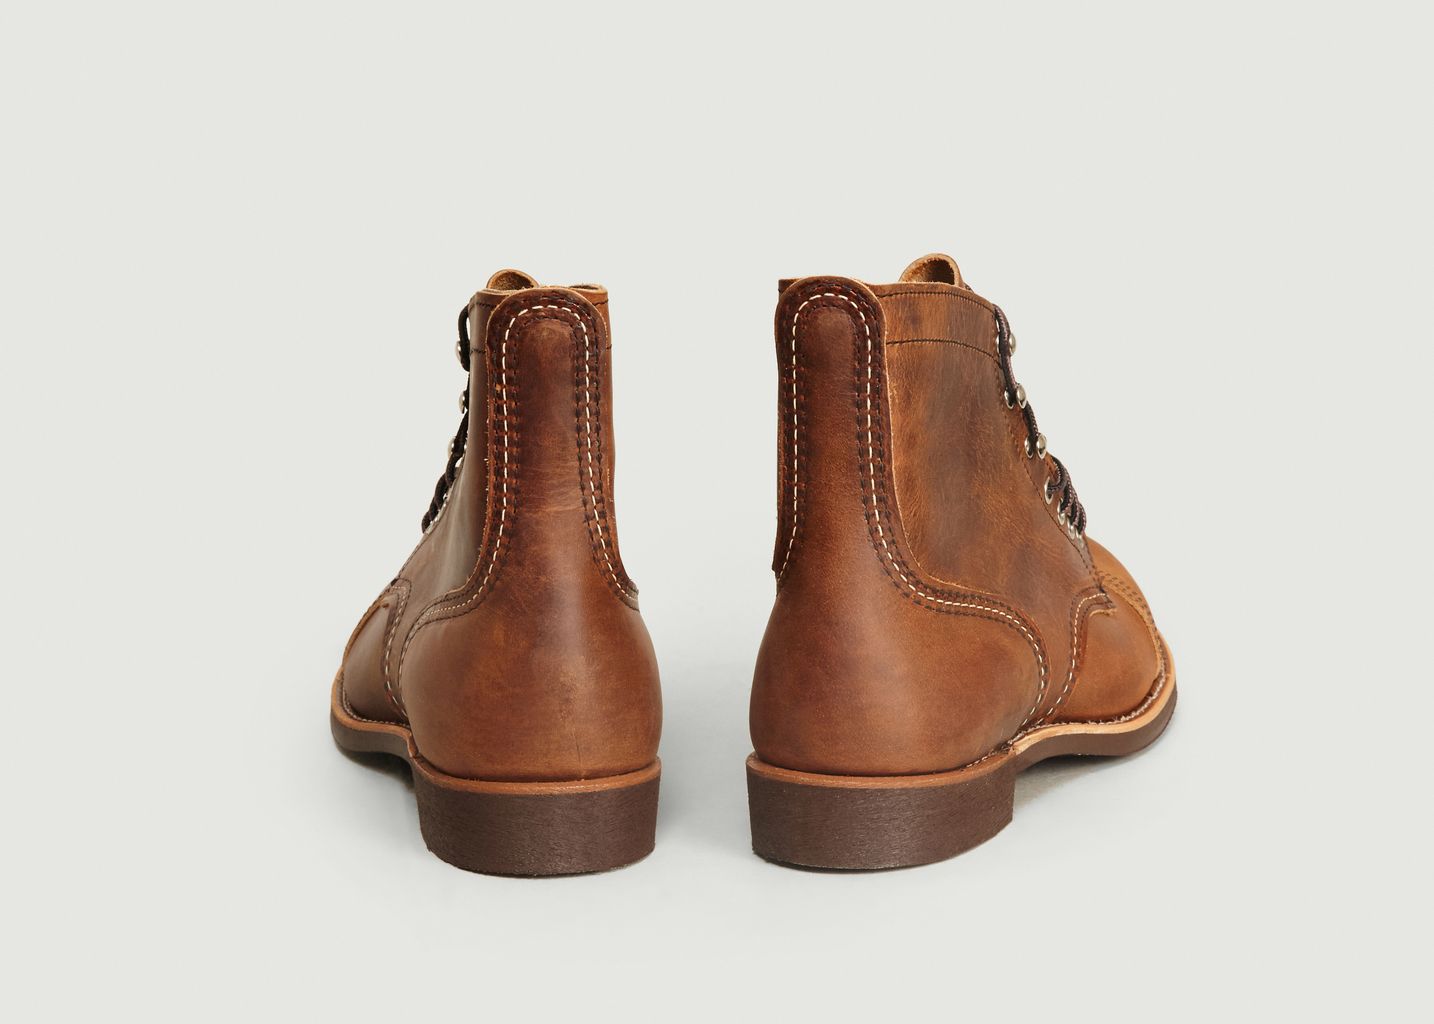 Boots Iron Ranger Copper Rough & Tough - Red Wing Shoes